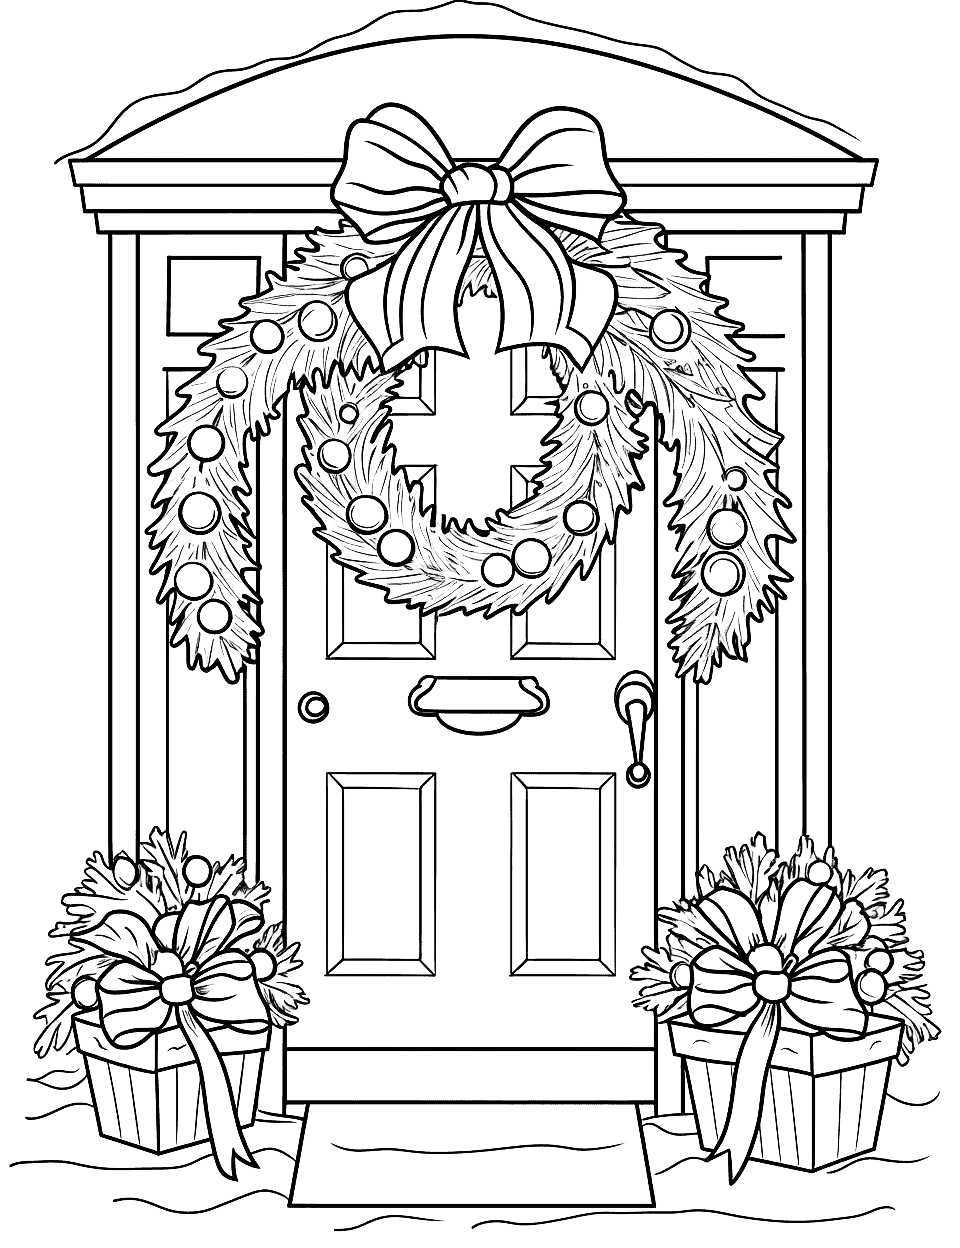 Festive Front Door Christmas Coloring Page - A front door decorated with a festive Christmas wreath.